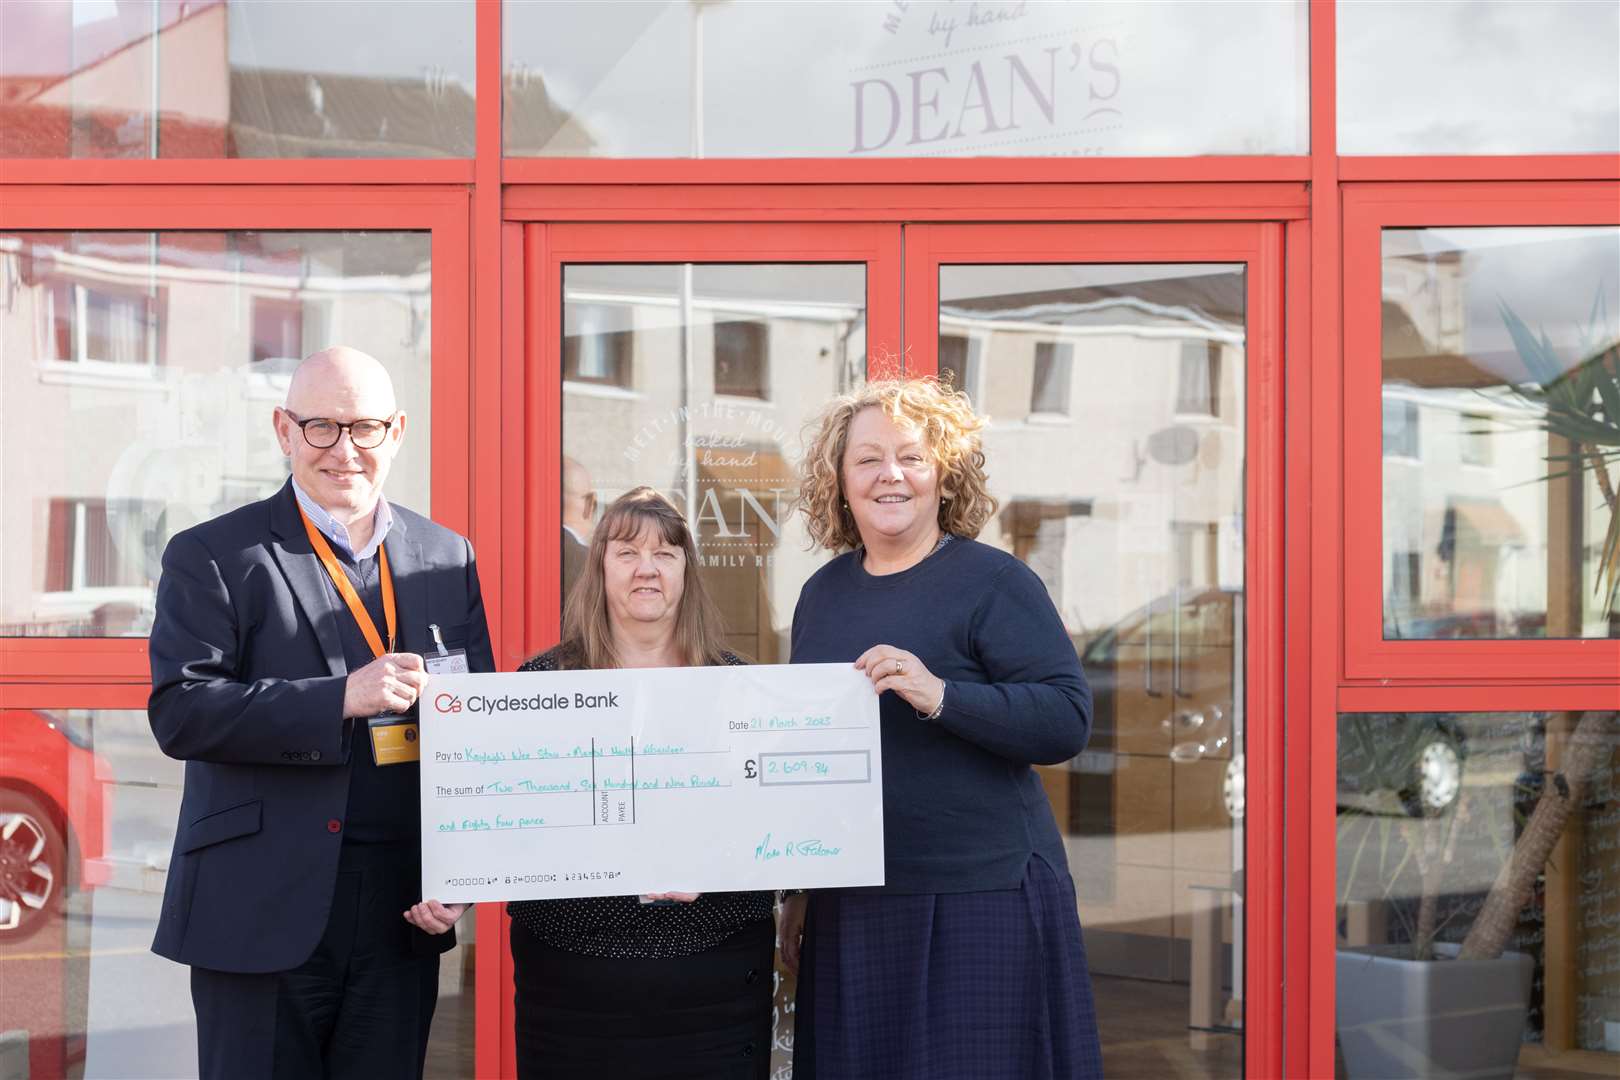 Moria Falconer from Dean's of Huntly, flanked by Graeme Kinghorn and Fiona Heinonen, the respective CEOs of Mental Health Aberdeen and Kayleigh's Wee Stars. Picture: Beth Taylor.